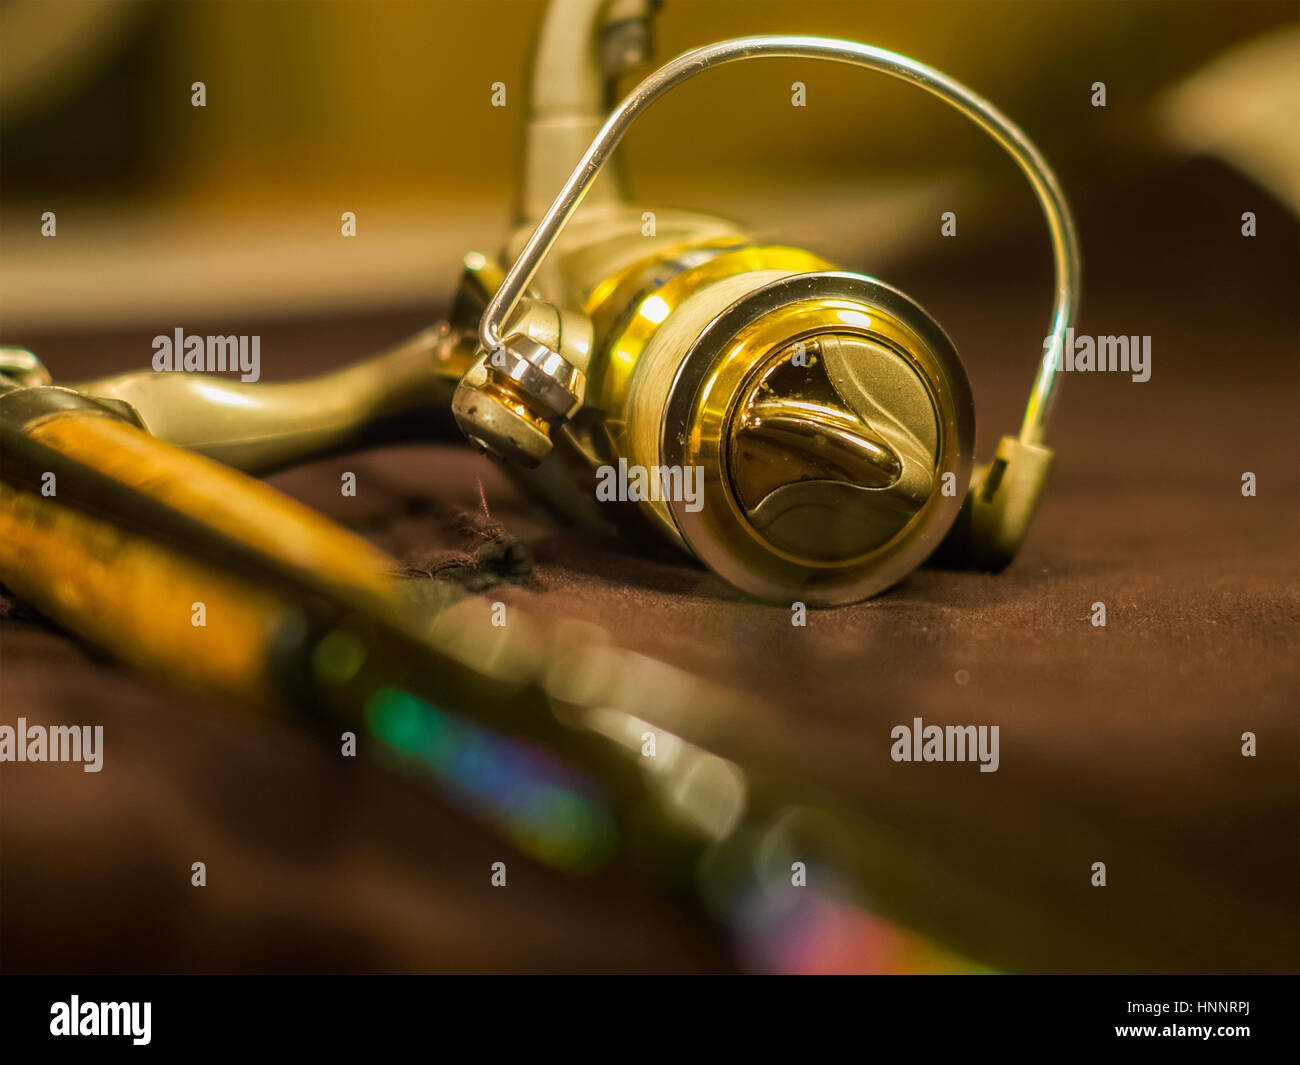 The golden fishing reels on the fishing rod Stock Photo